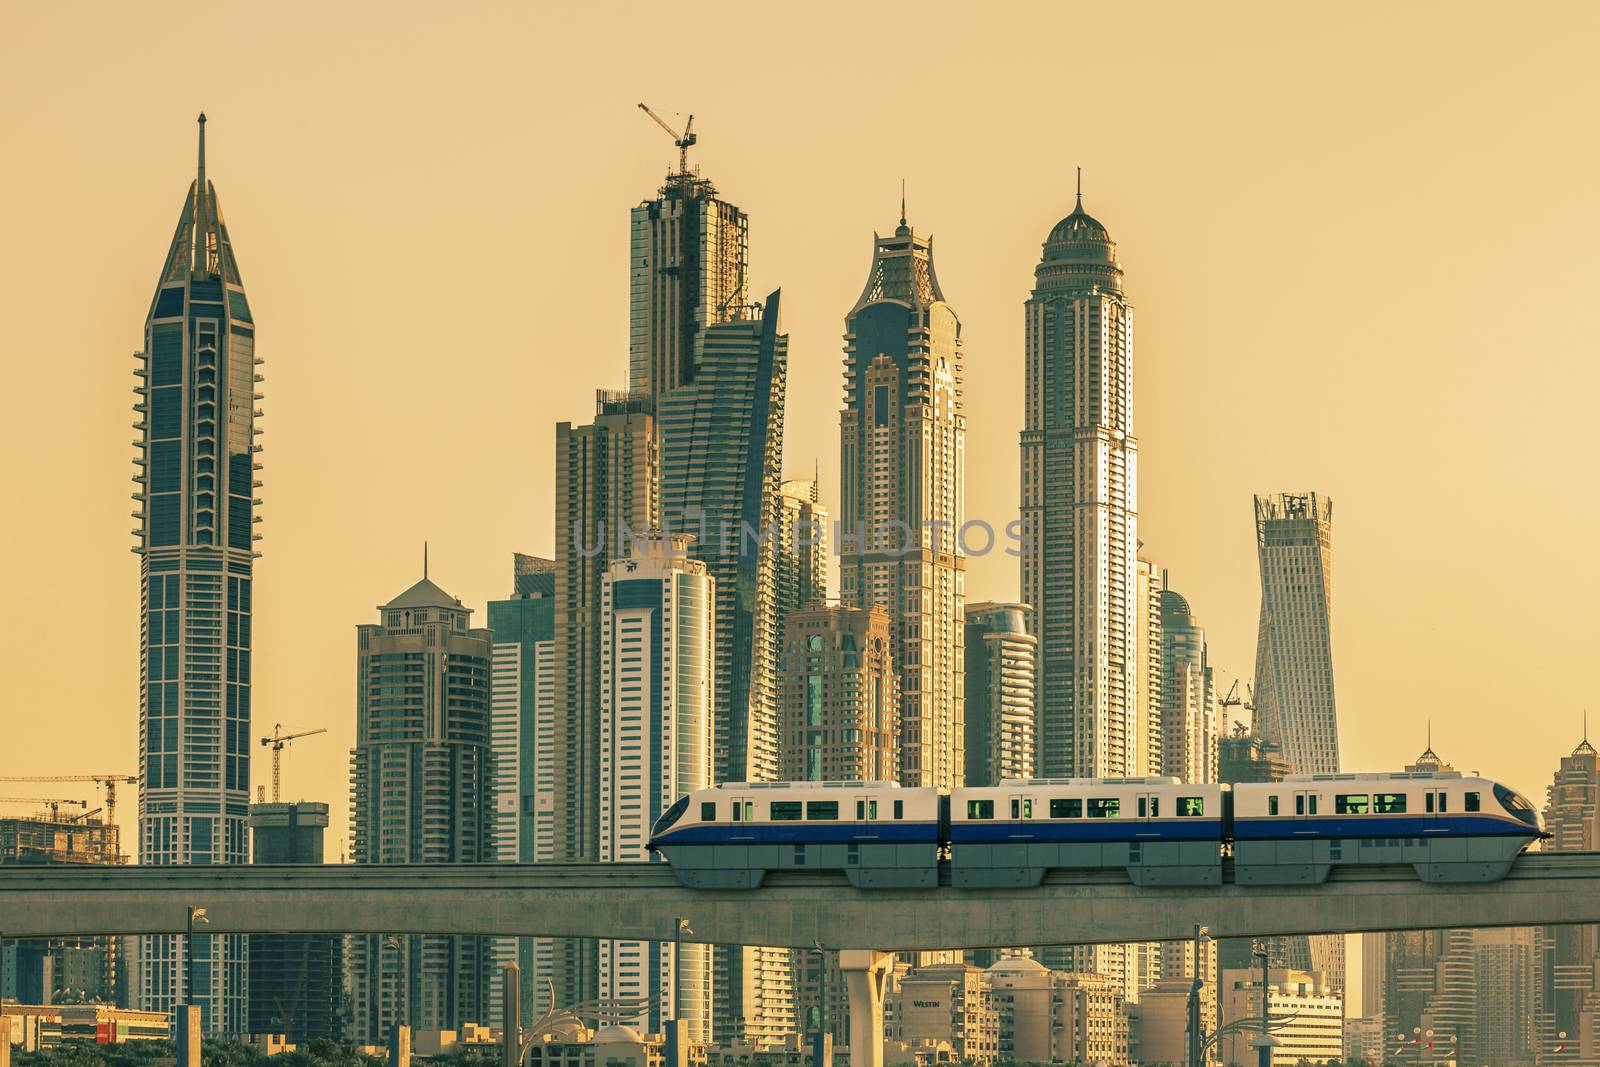 View of Dubai with subway and skycrapers at sunset.